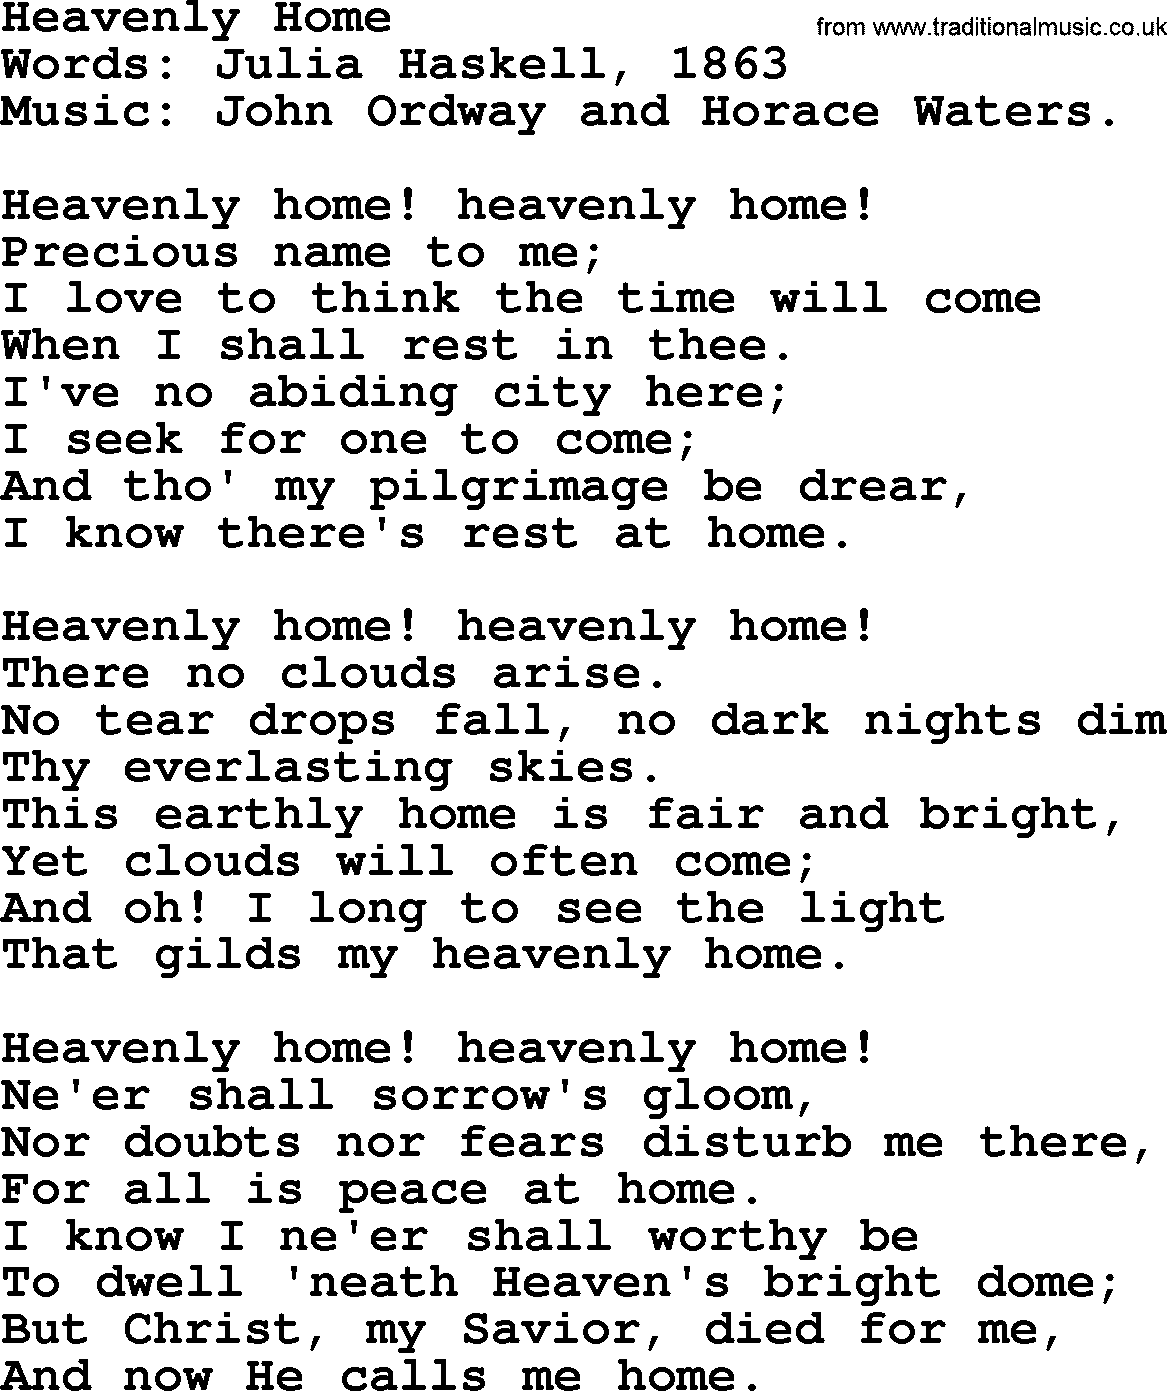 Hymns and Songs about Heaven: Heavenly Home - lyrics, and PDF